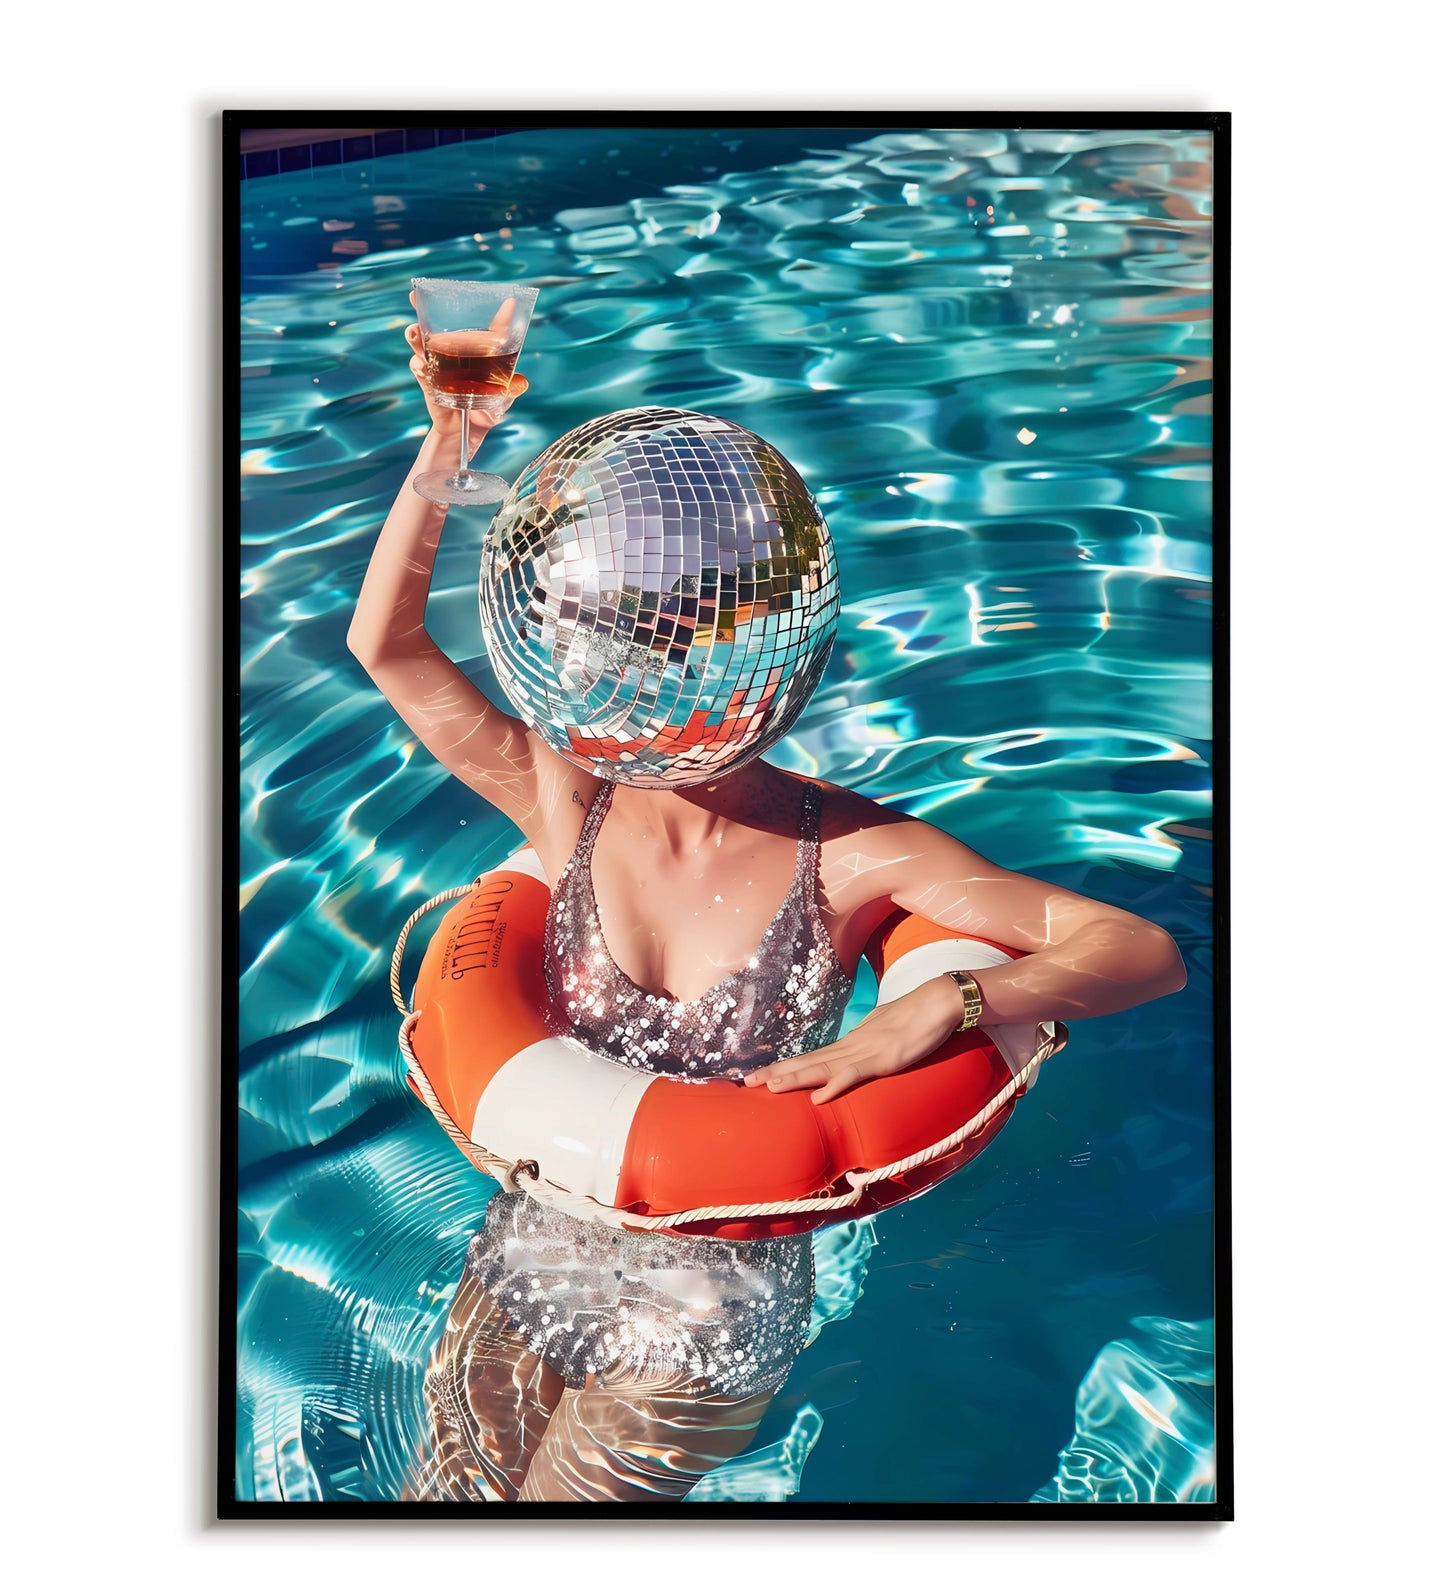 Glittery Glam Poolside printable poster. Available for purchase as a physical poster or digital download